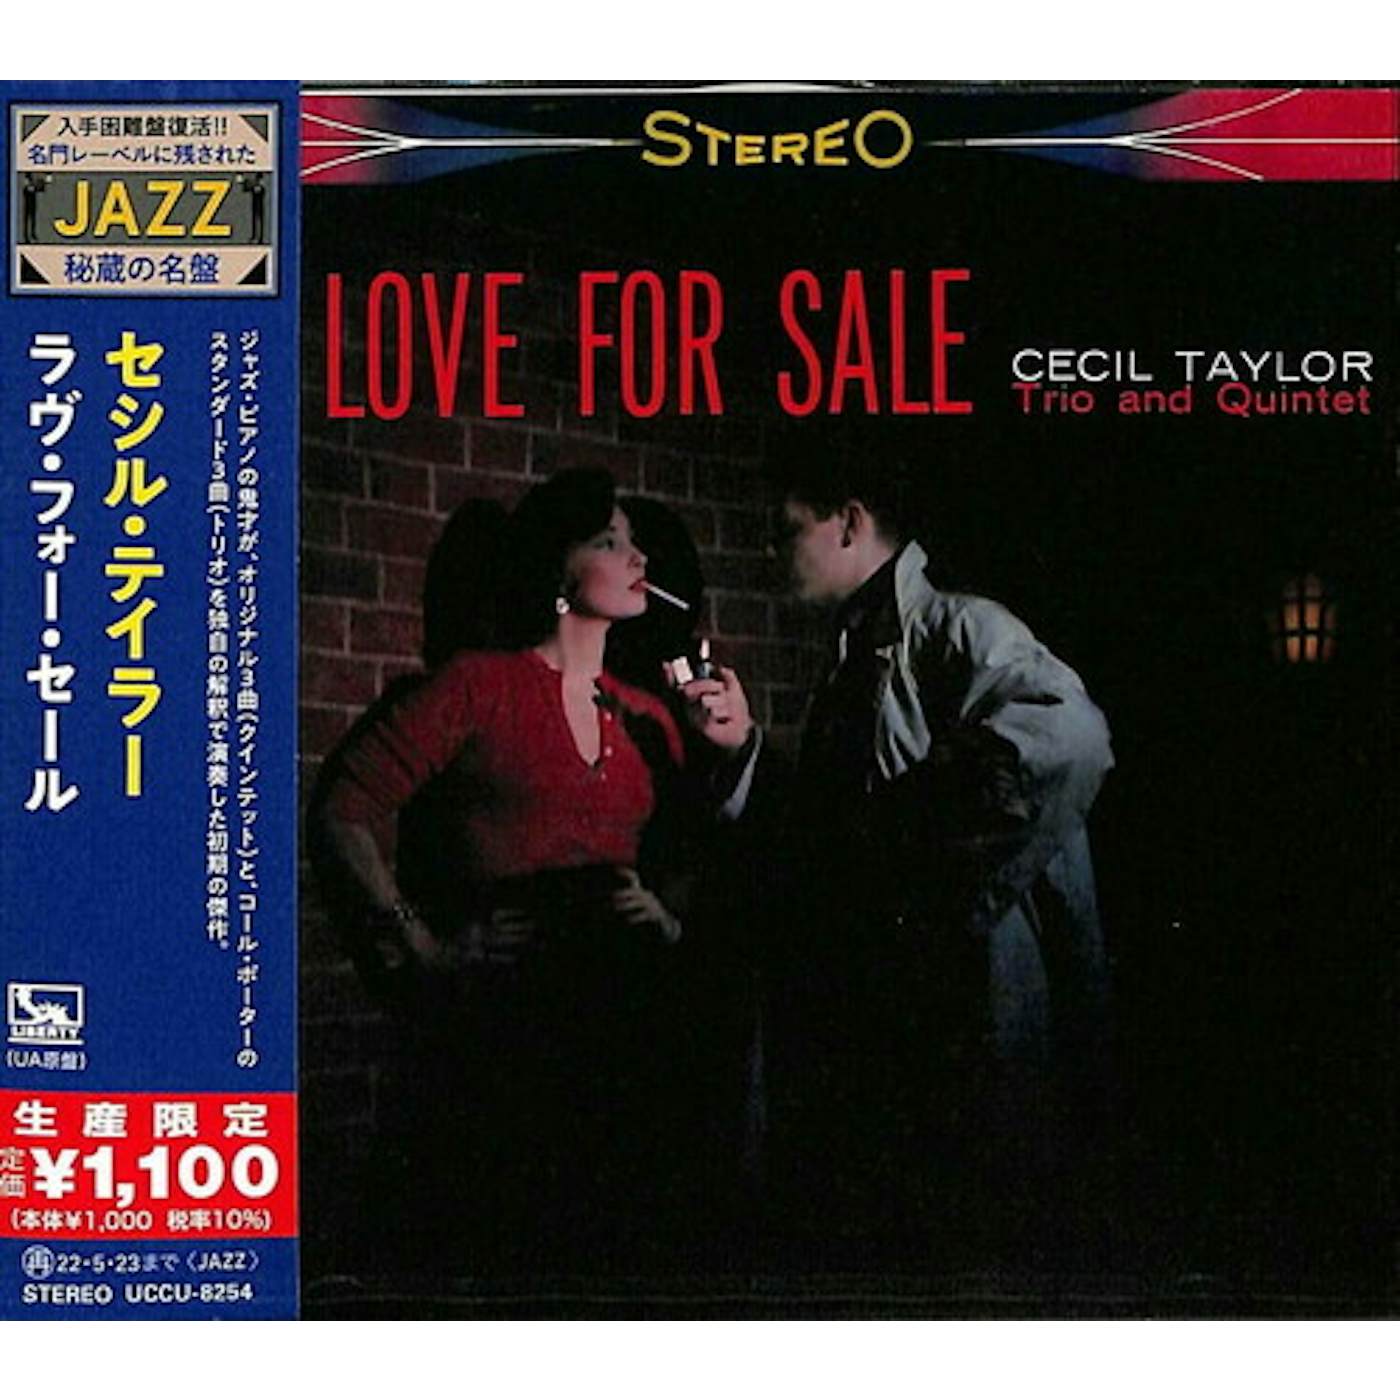 Cecil Taylor LOVE FOR SALE CD